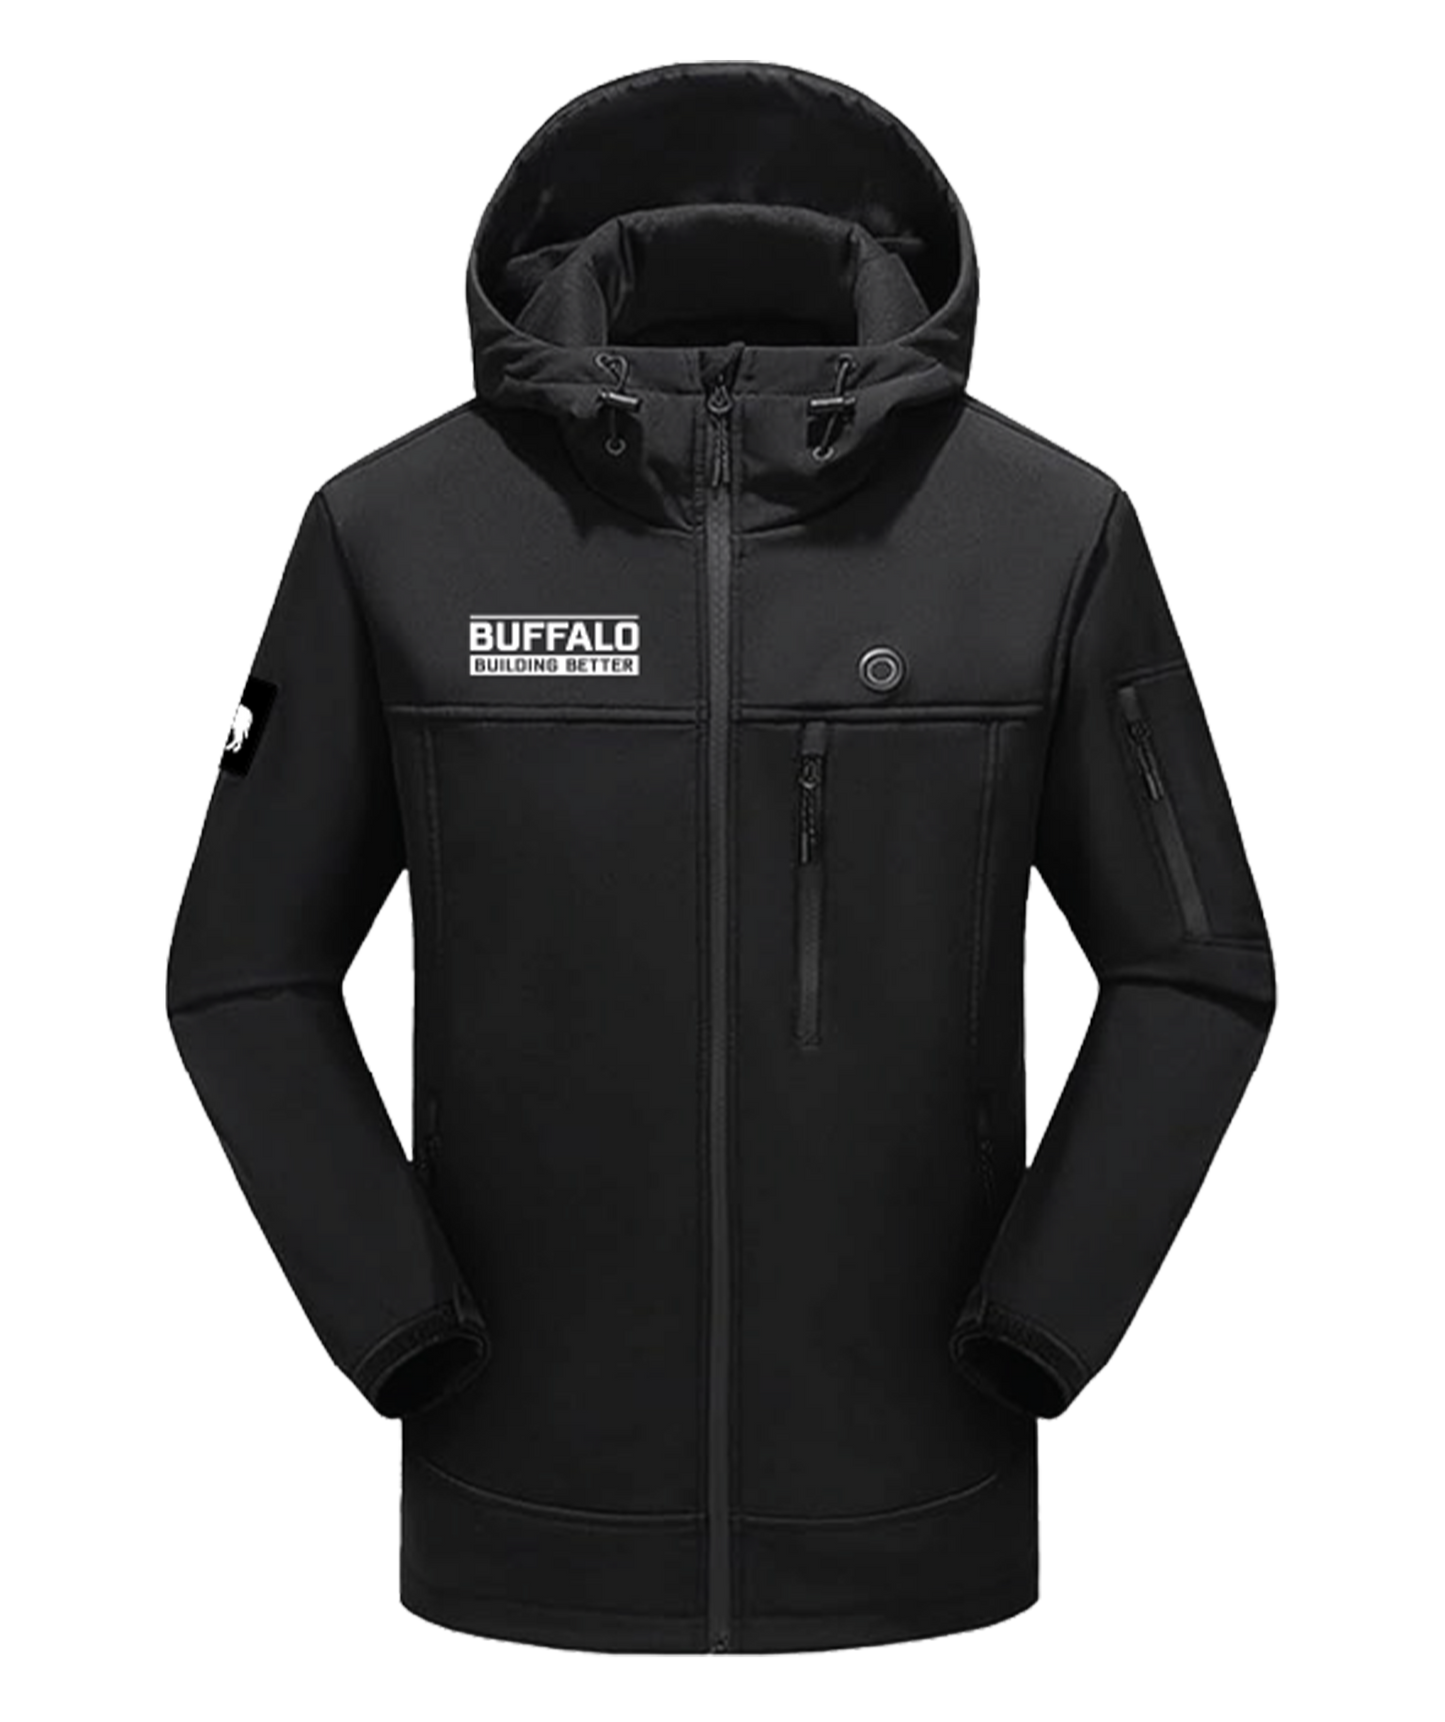 Heated Jacket with Velcro Sleeve Patch